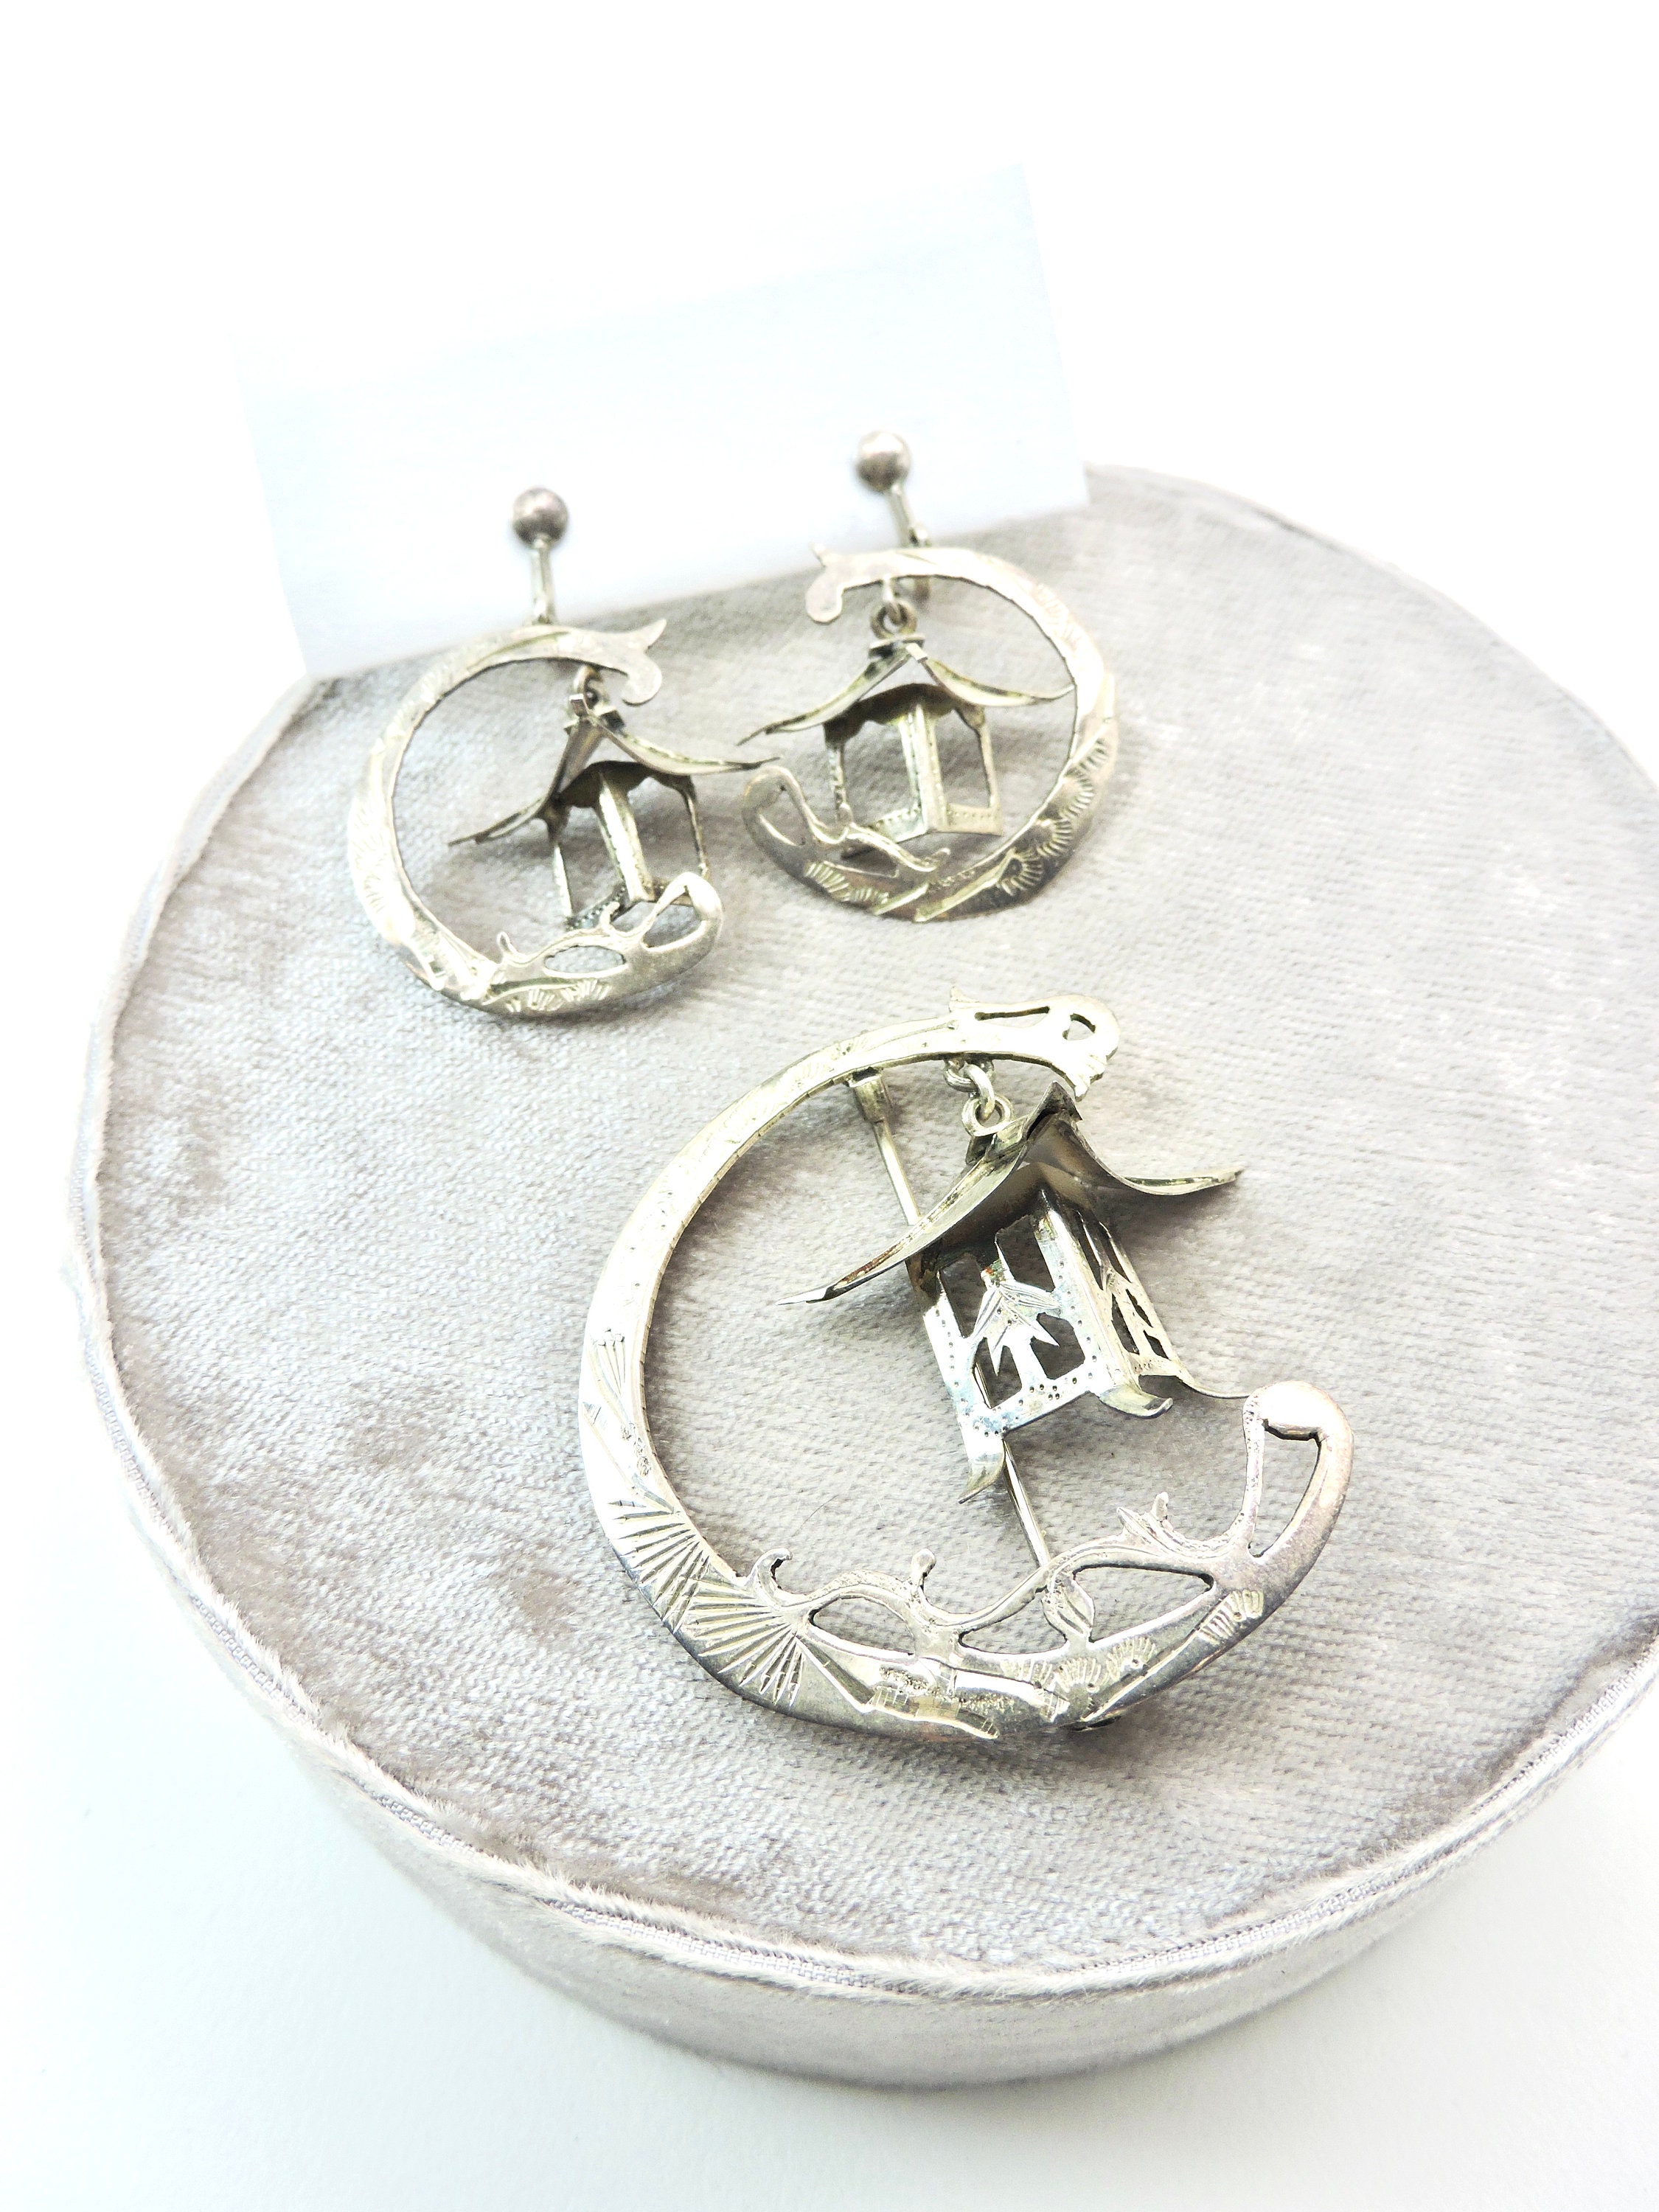 Japanese Lantern Crescent Moon Vintage Sterling Silver Brooch and Earrings